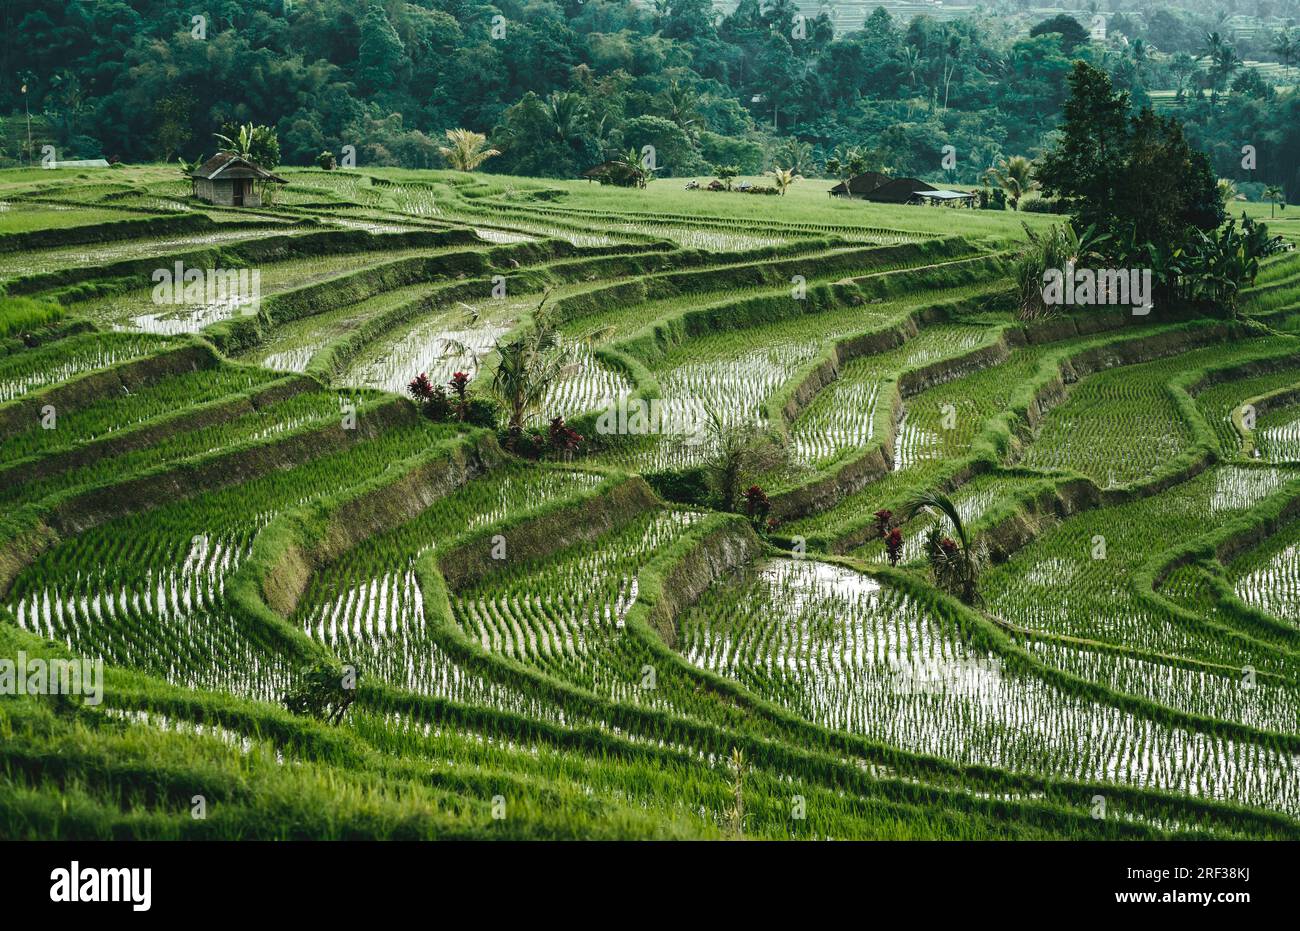 Top view of rice terrace with water. Landscape photo of rice plantation, balinese agriculture field Stock Photo